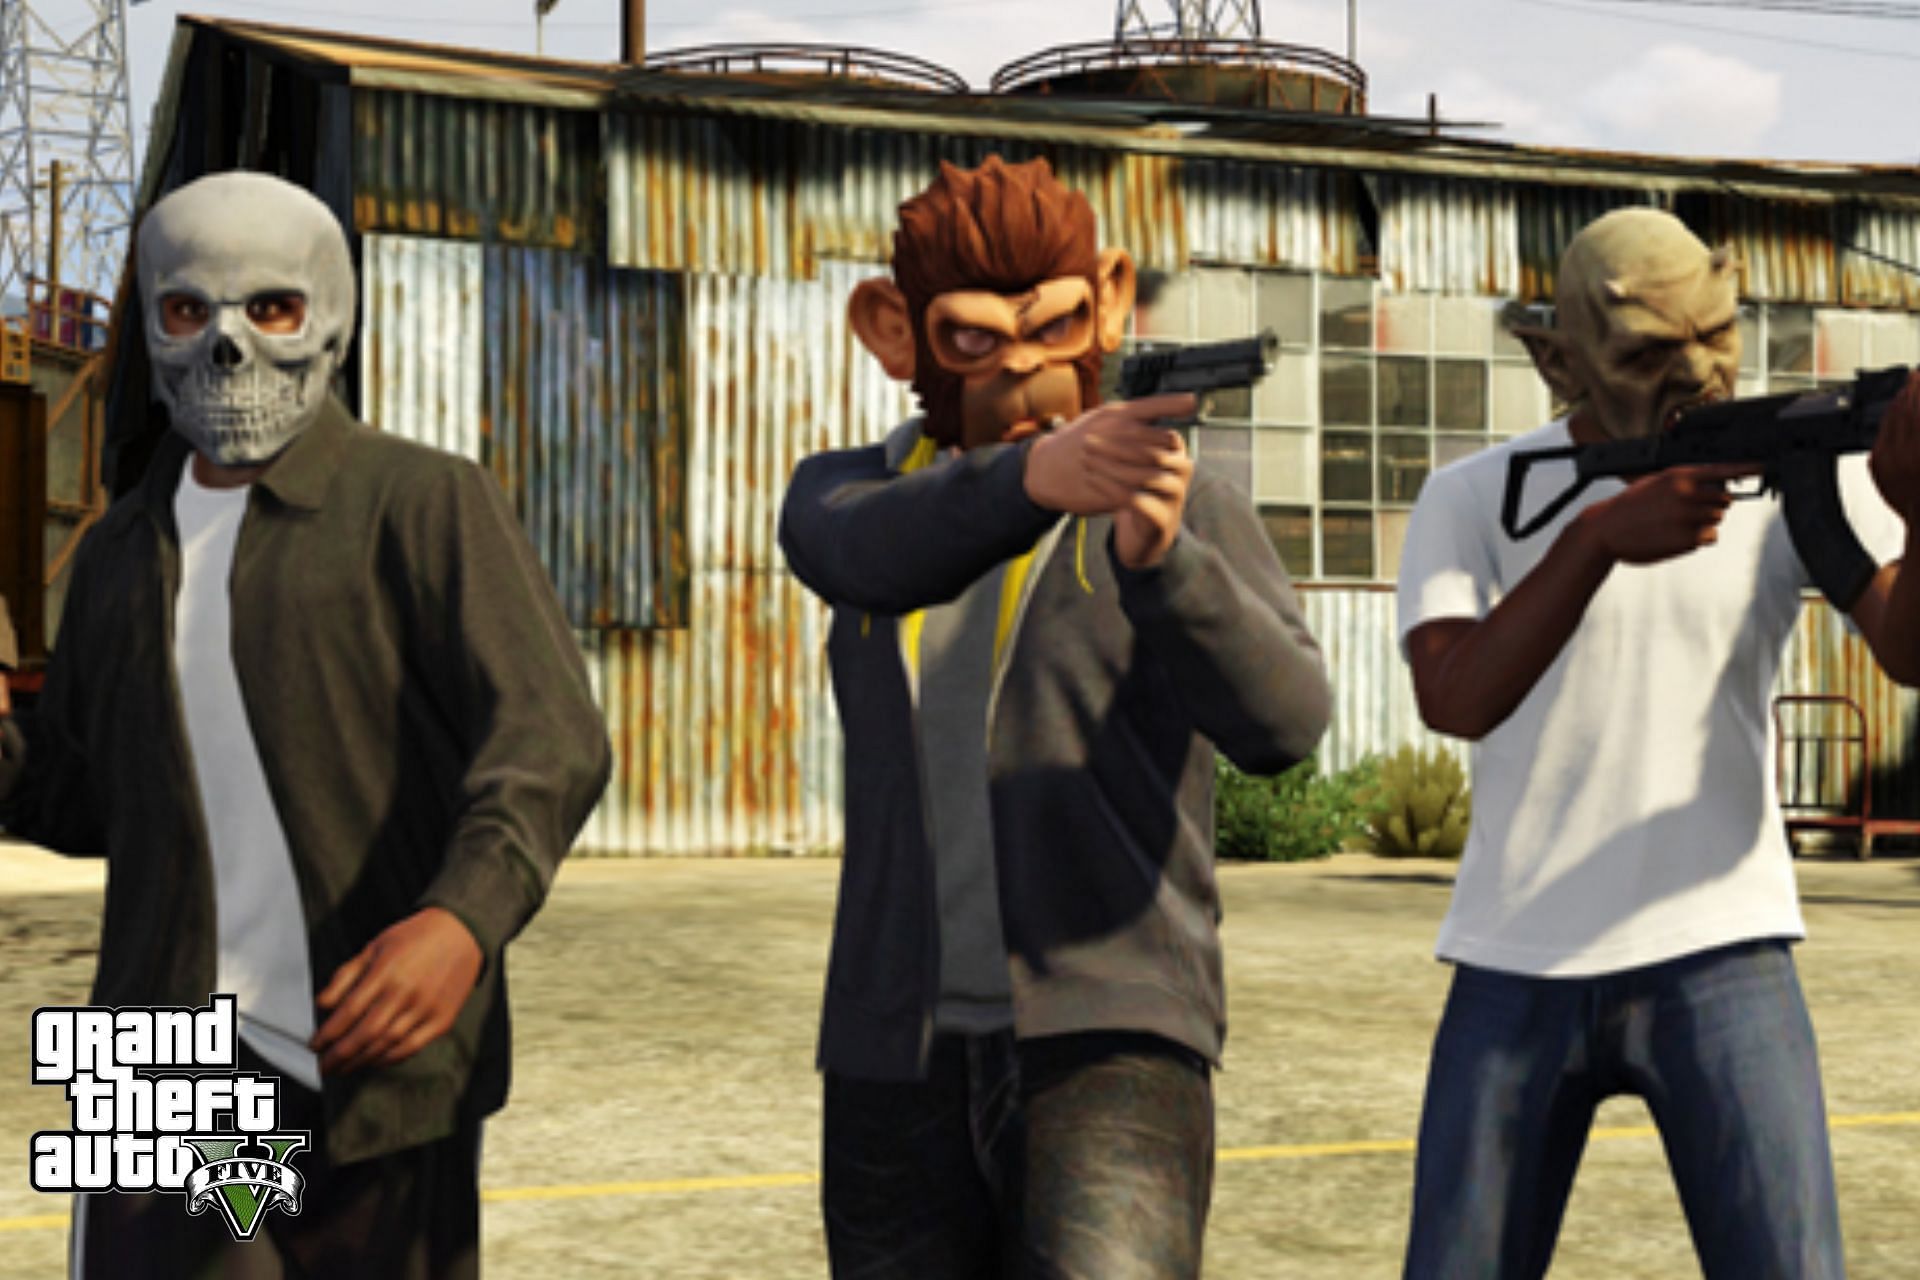 Having a crew is really useful in Grand Theft Auto Online (Images via Sportskeeda)